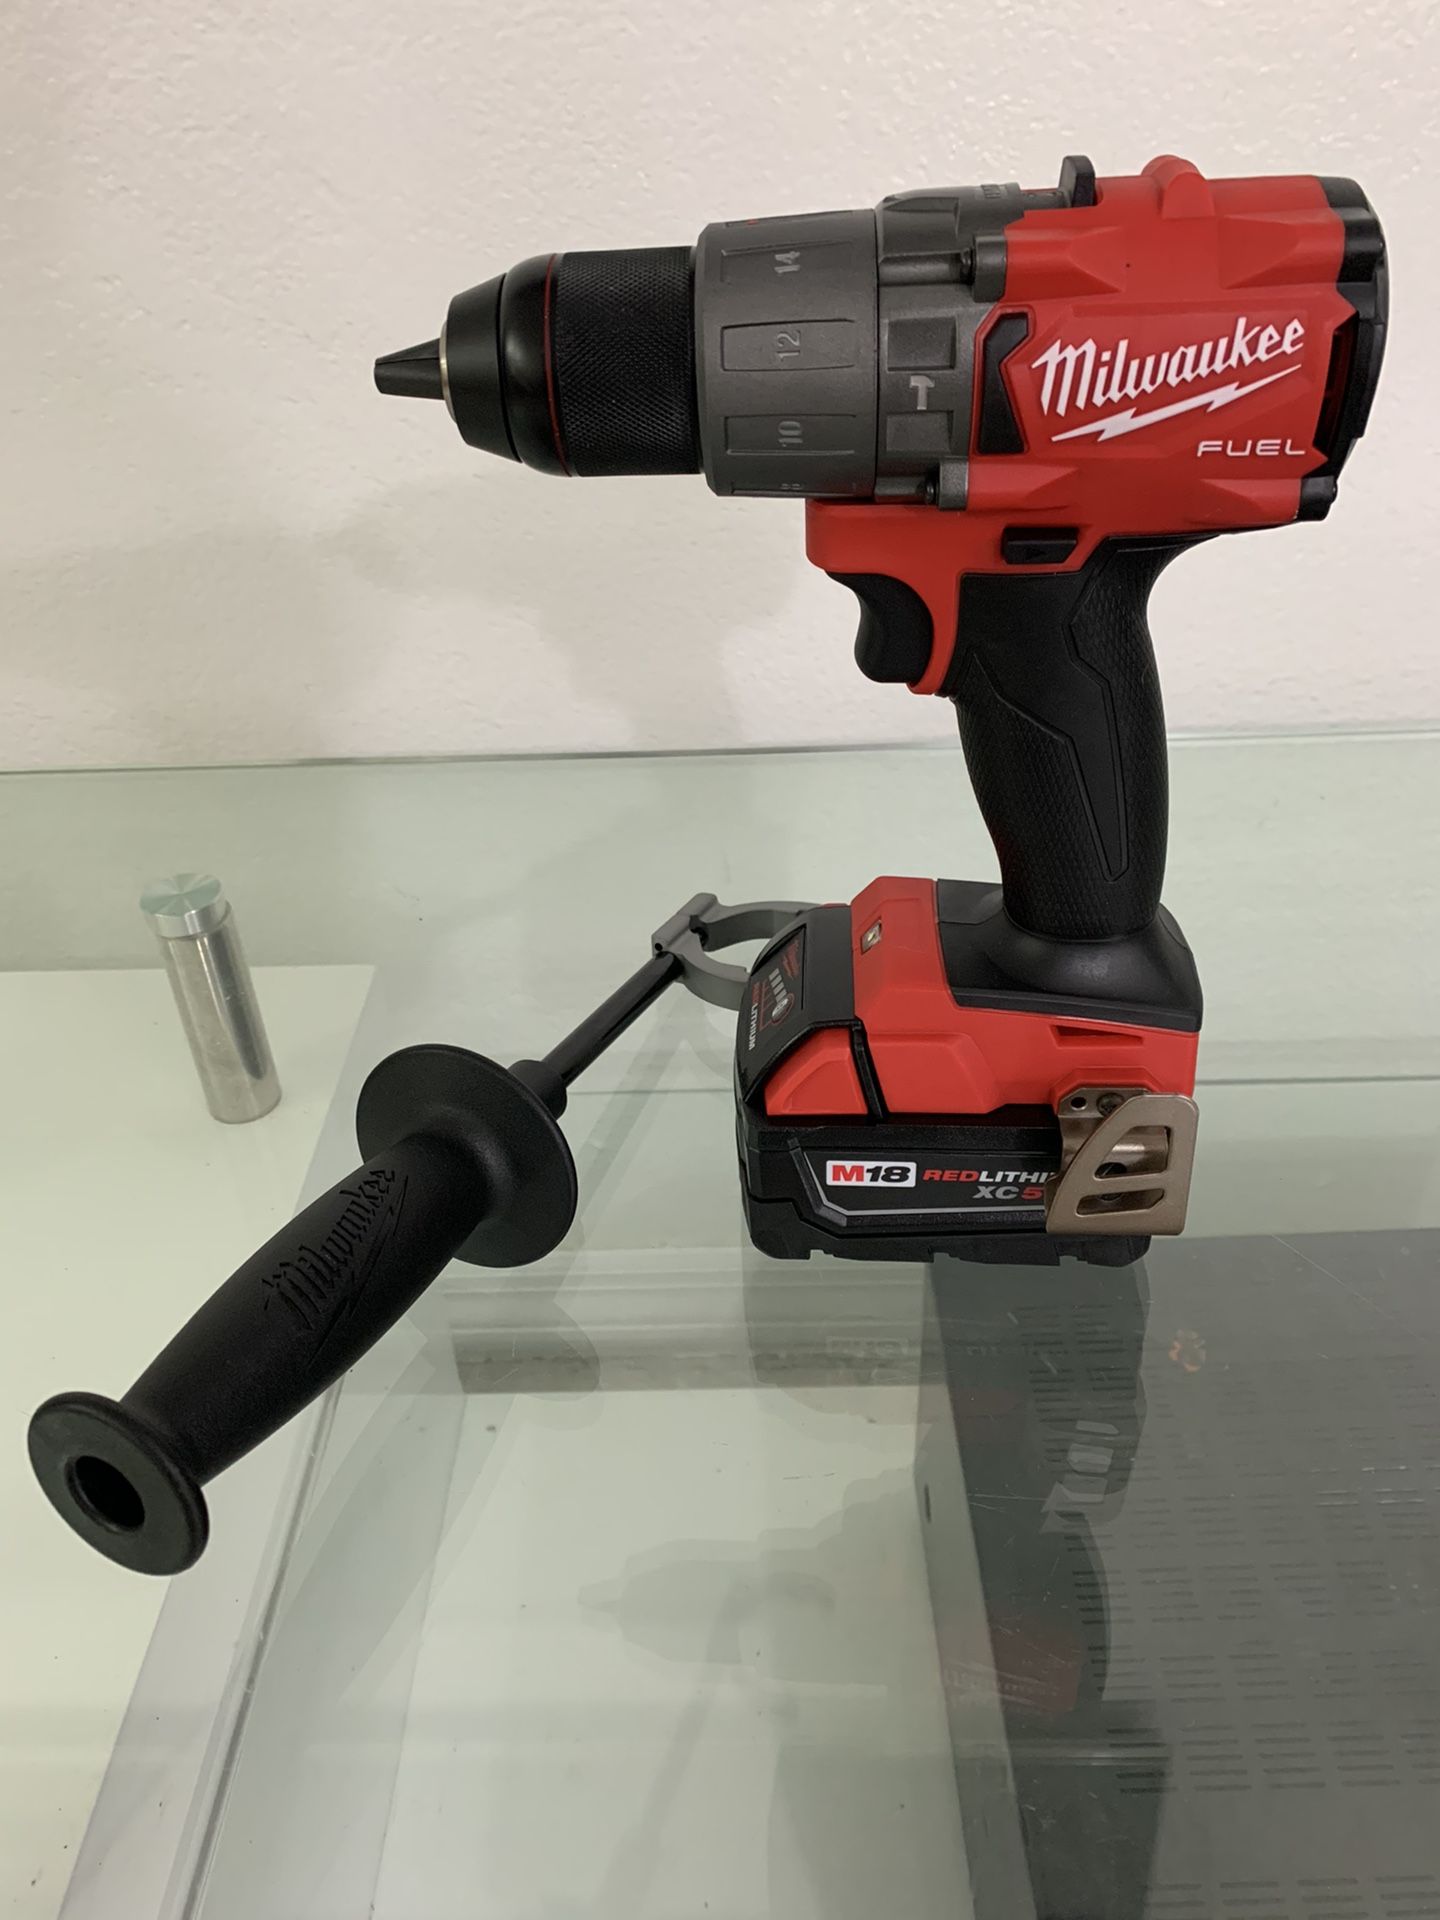 Milwaukee 2804 M18 FUEL 18V 1/2" Hammer Drill/Driver with 5.0 battery(NEW)